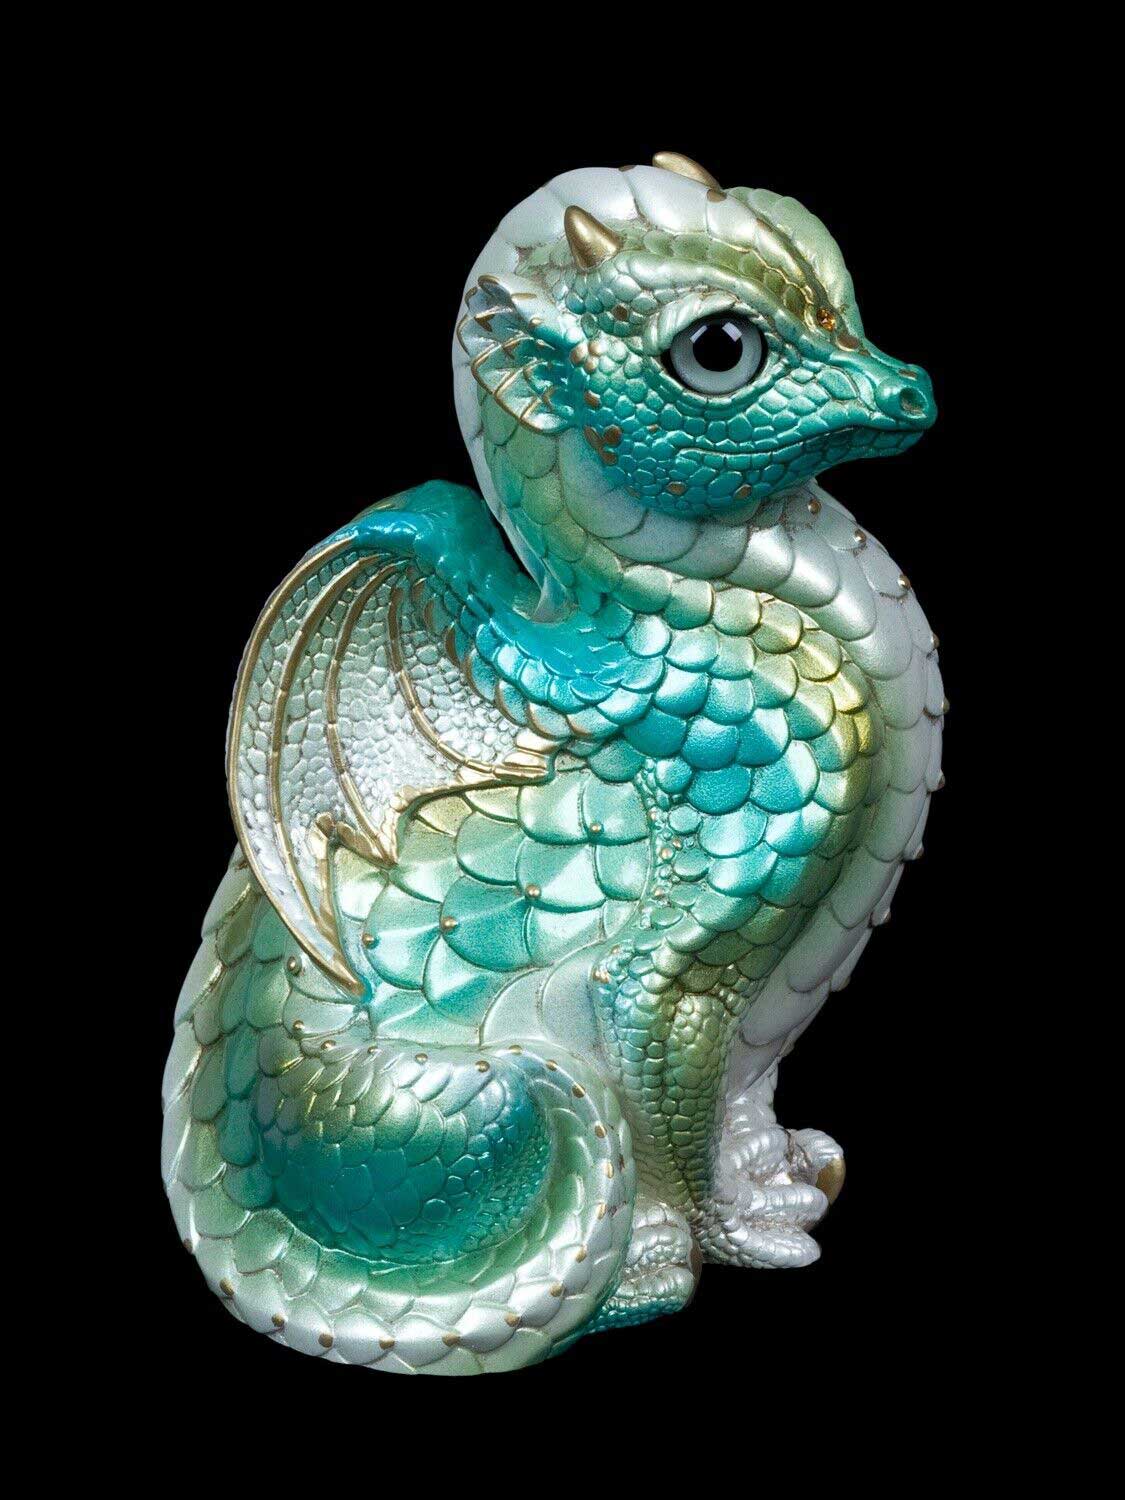 20230218-Seaglass-Fledgling-Dragon-Test-Paint-1-by-Gina